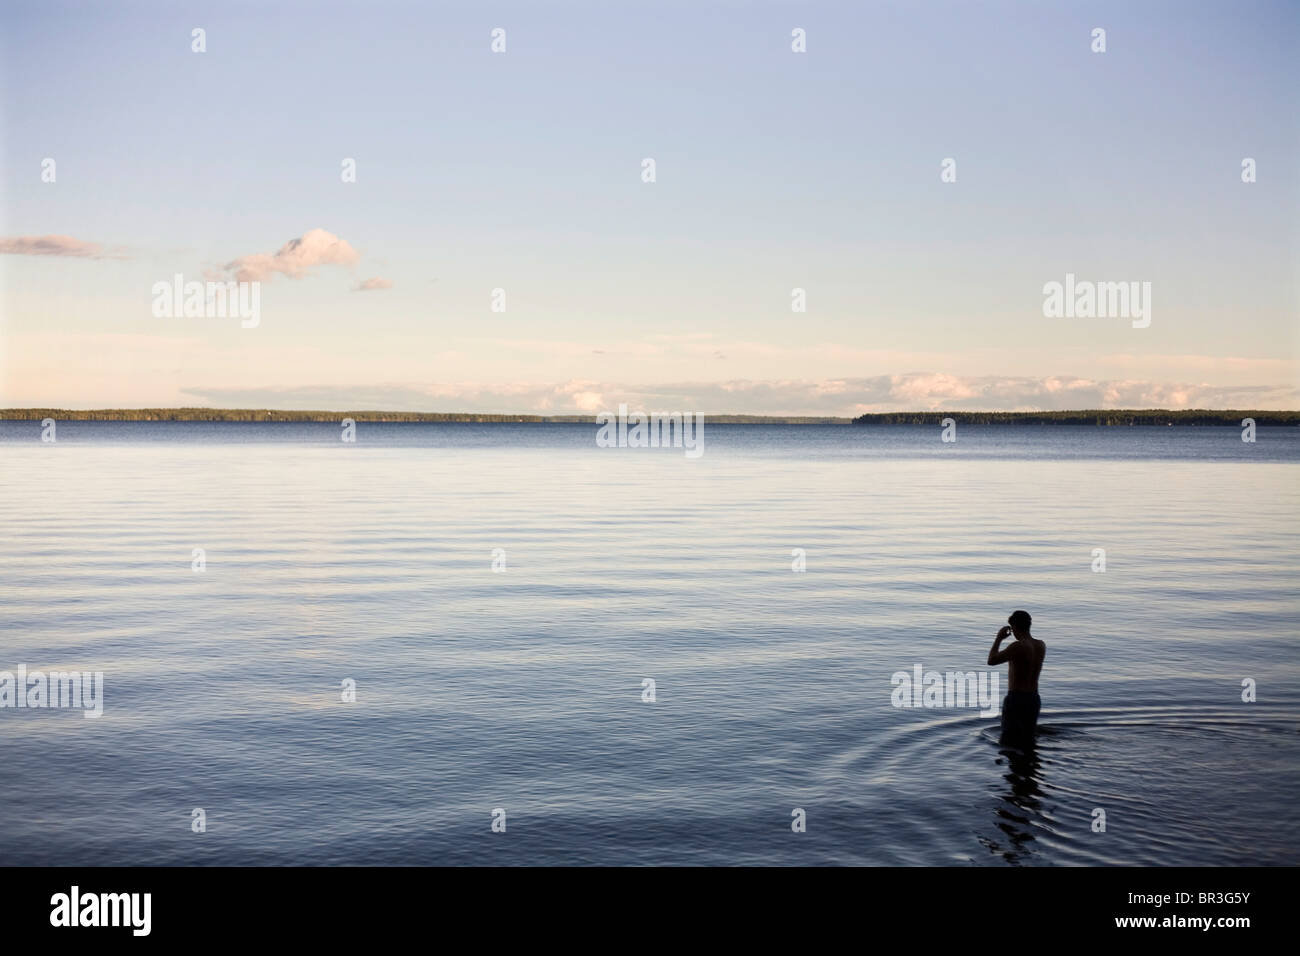 A swimmer prepares to swim at dusk. Stock Photo